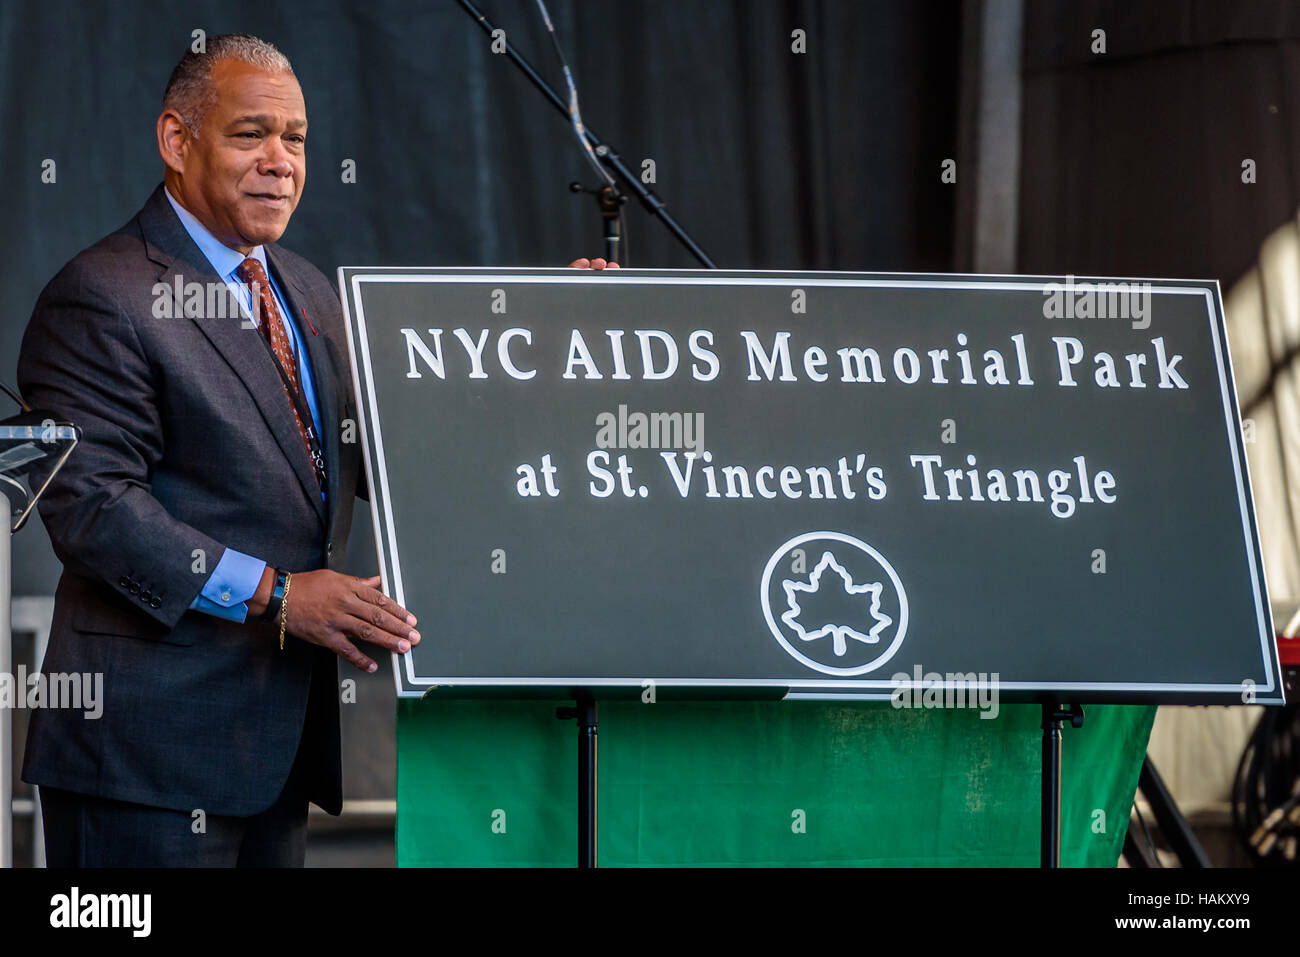 New York, United States. 01st Dec, 2016. Mitchell J. Silver, Commissioner of the New York City Department of Parks and Recreation - Community leaders, activists, and elected officials gathered for a World AIDS Day program and formal dedication ceremony of New York City AIDS Memorial Park at St. Vincent's Triangle. The event was hosted by the New York City AIDS Memorial Board of Directors and representatives from End AIDS NY 2020, the New York City Department of Health and Mental Hygiene, and the New York State Department of Health. Credit:  Erik McGregor/Pacific Press/Alamy Live News Stock Photo